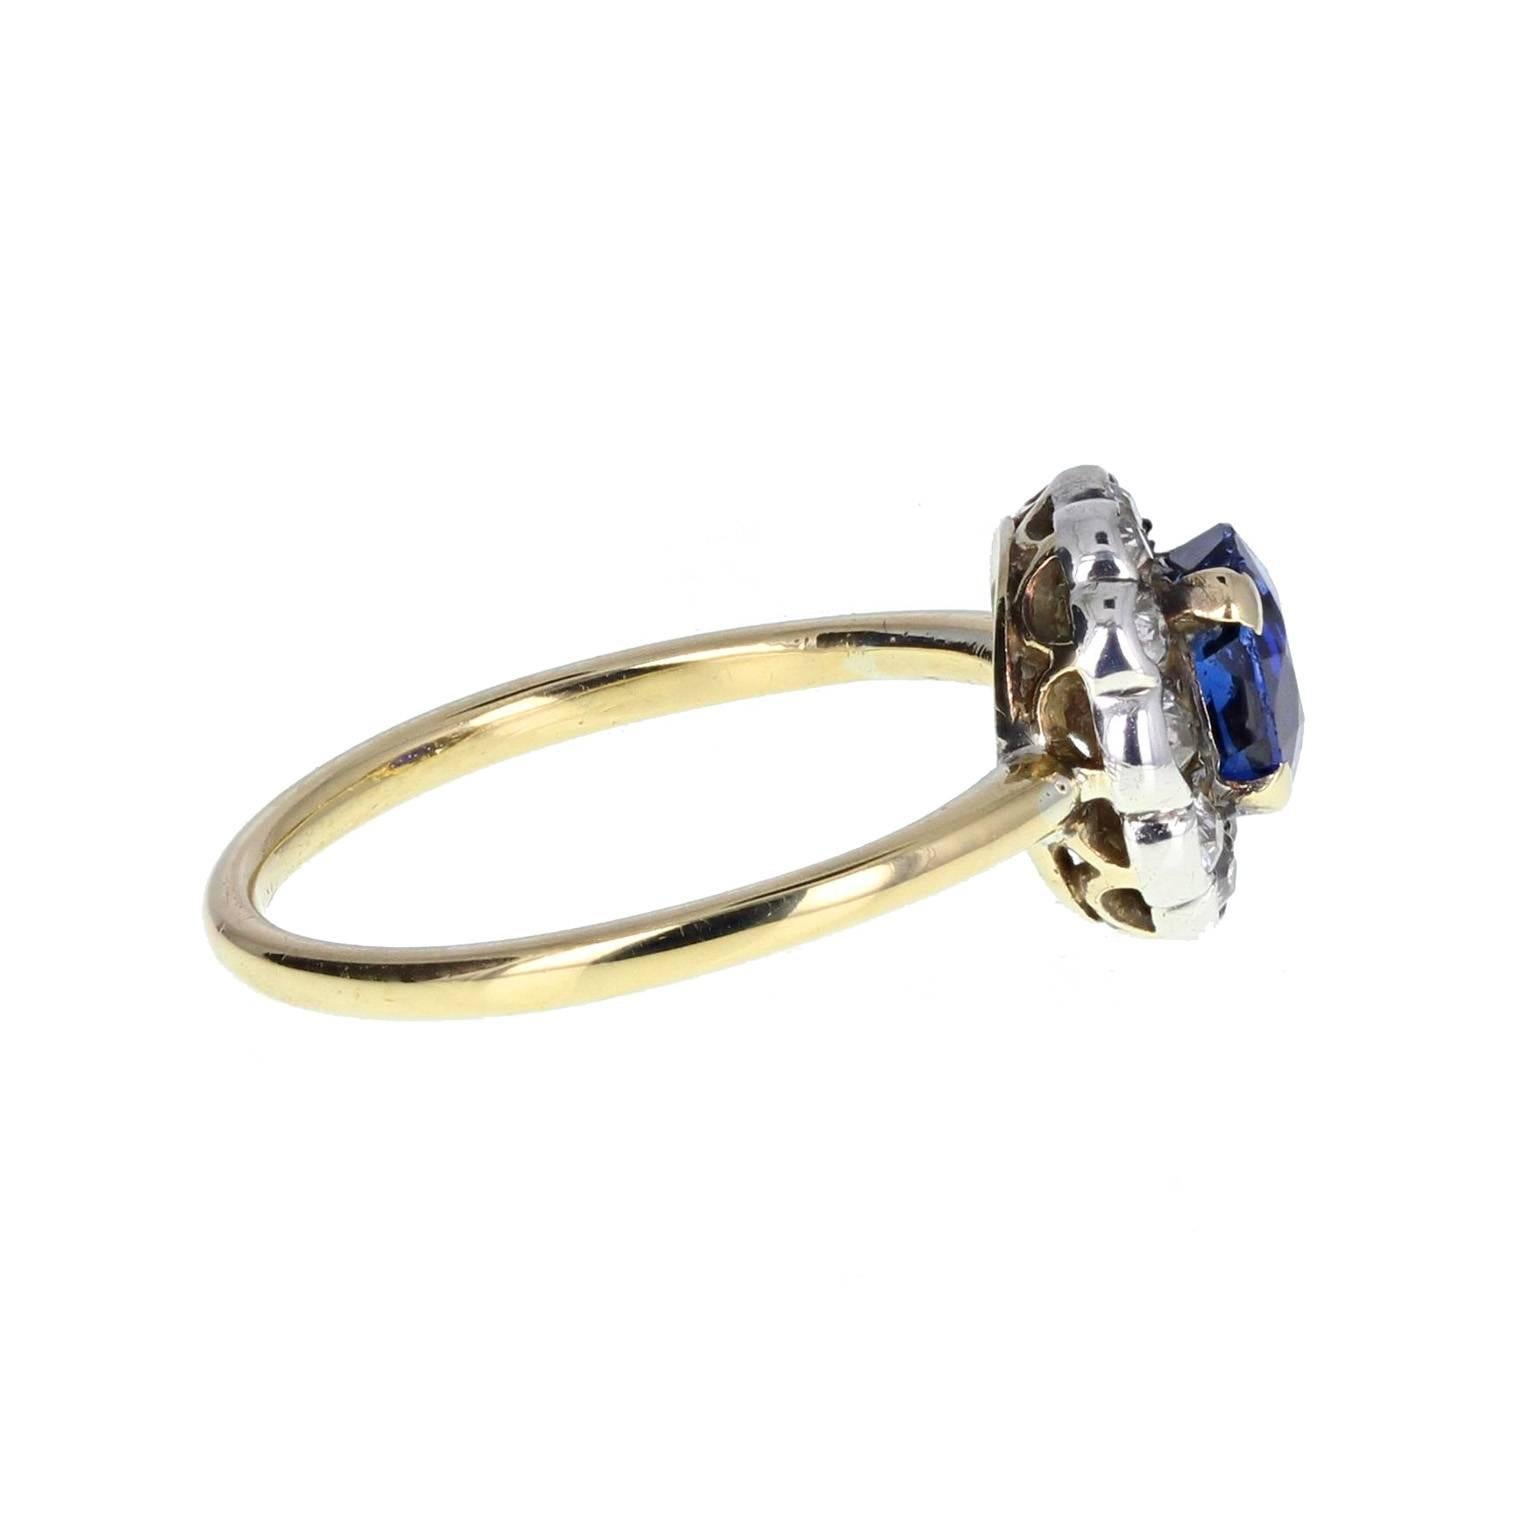 This sweet period ring features a central round-cut sapphire of exceptionally pleasing velvety blue, mounted in four claws and surrounded by single-cut diamonds to form a round cluster of approximately 10mm in diameter.
 
Shank and Setting
Tests